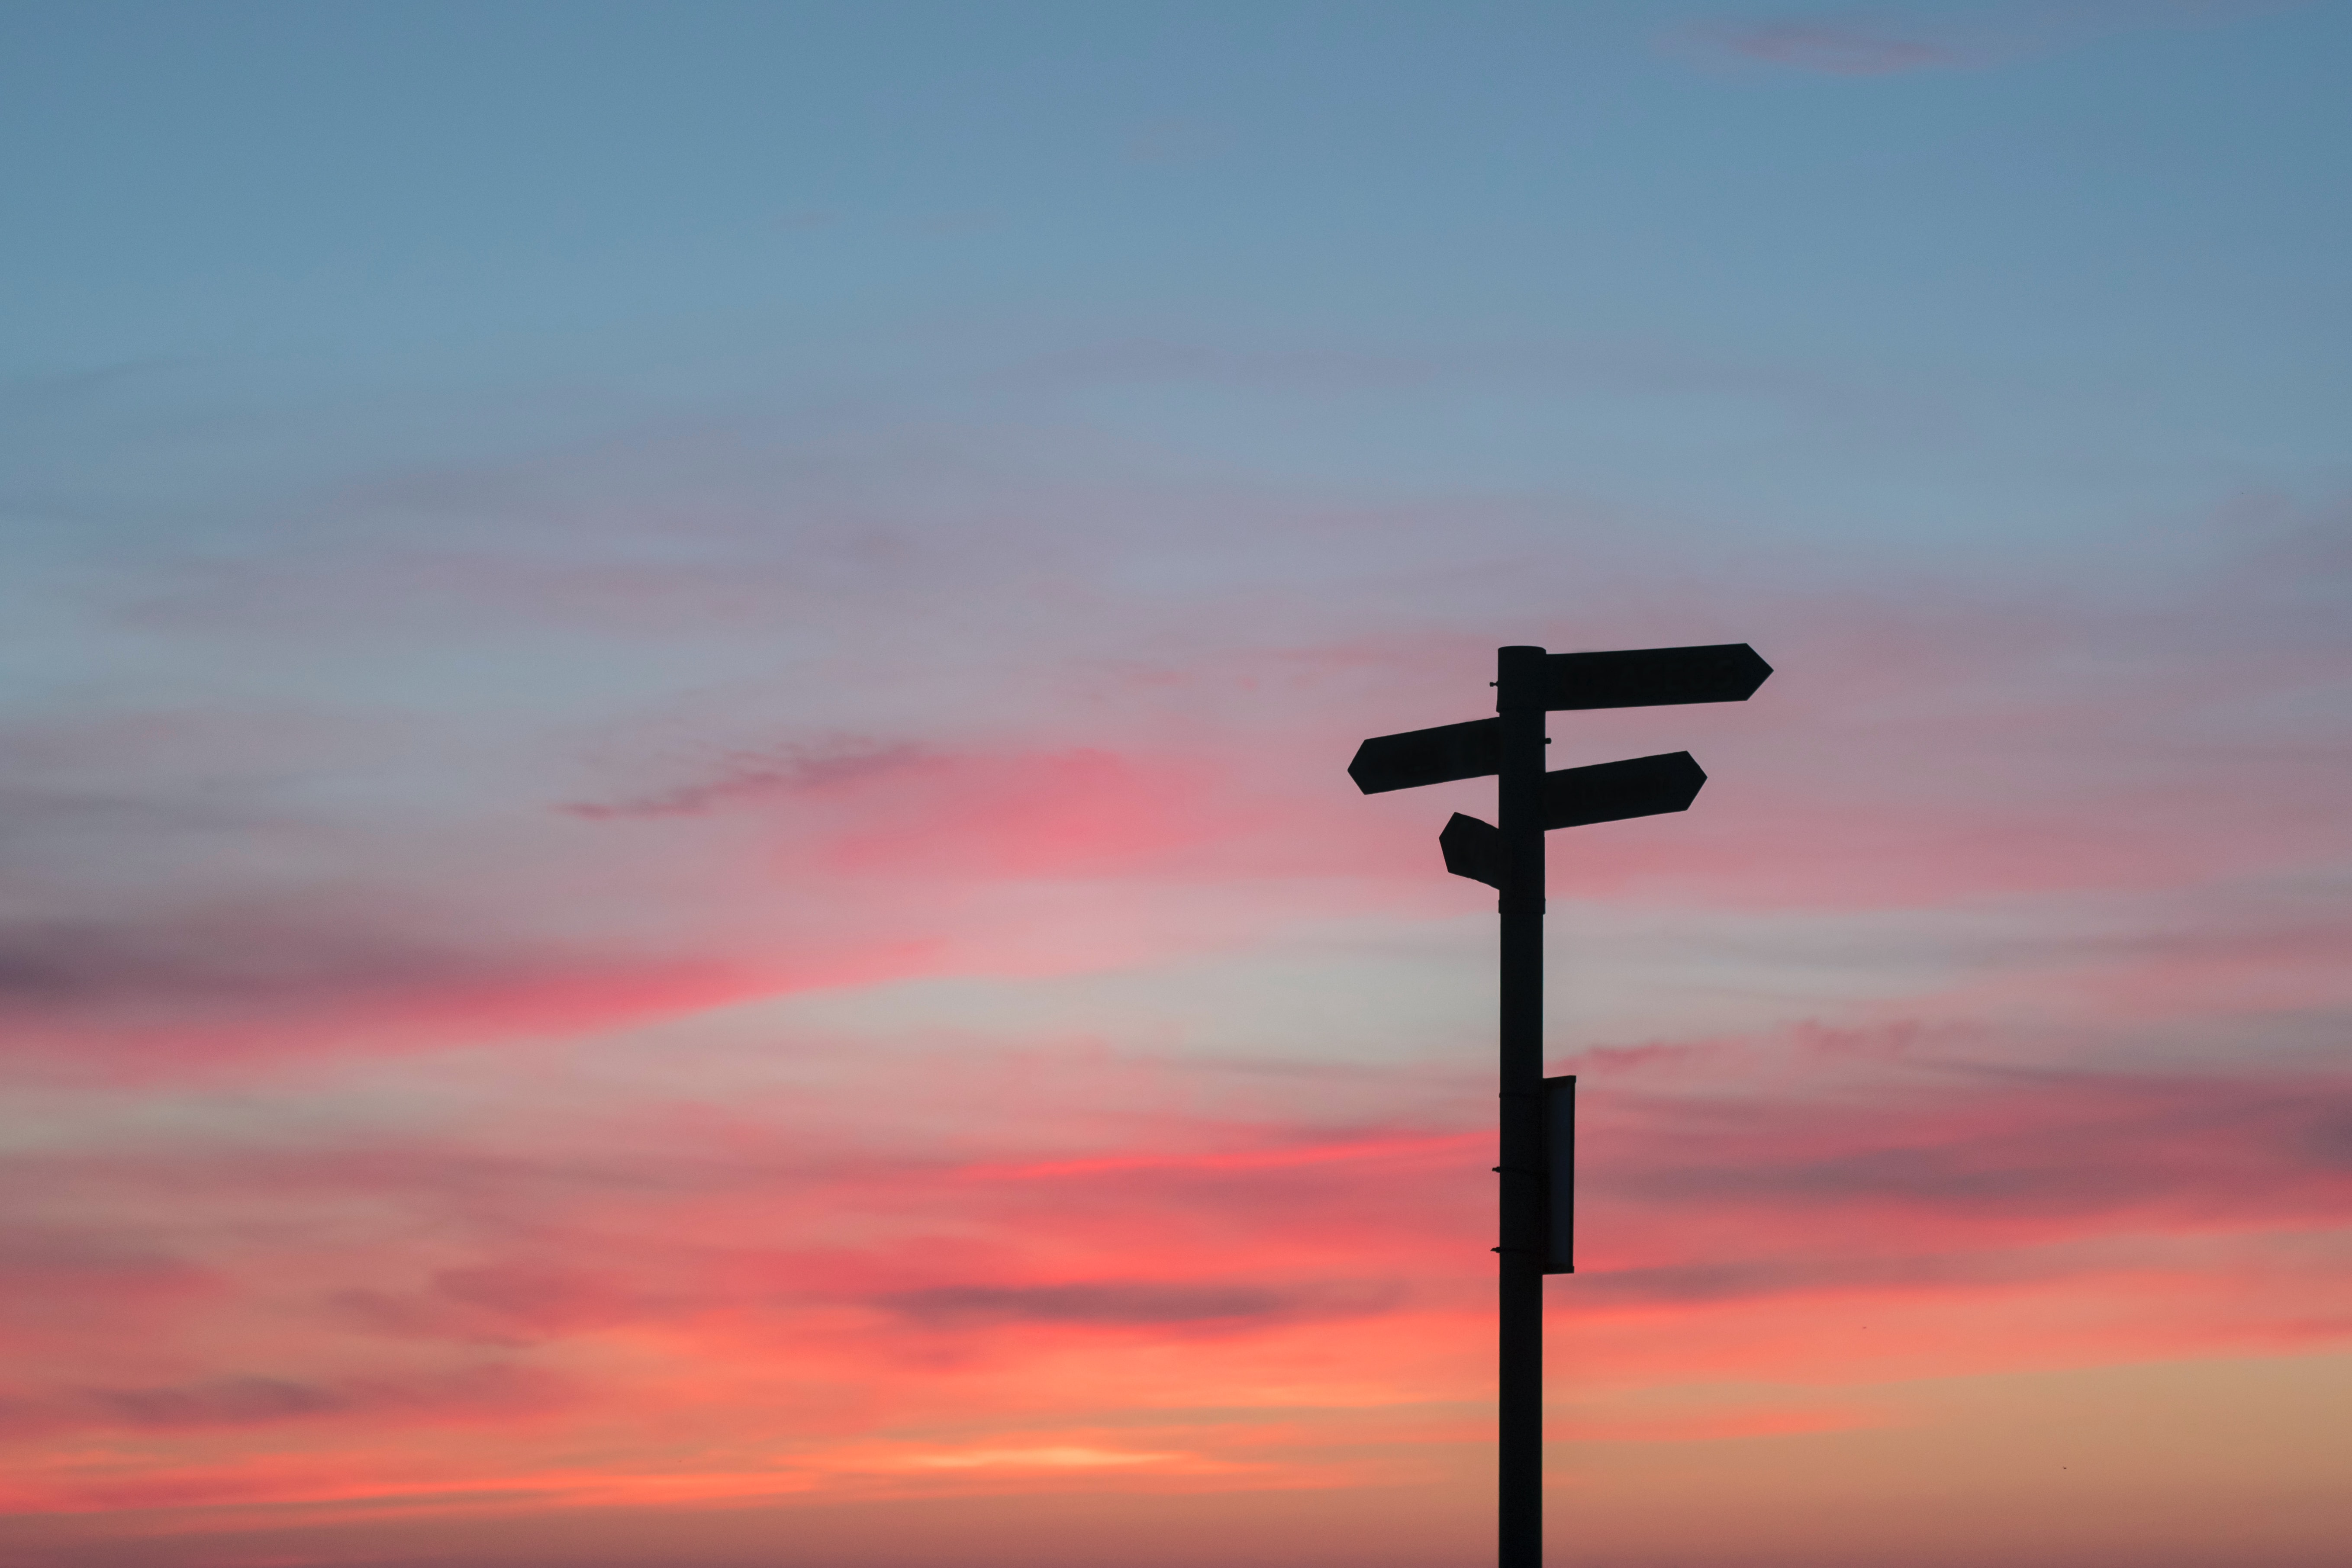 A silhouette of a directional sign at sunset